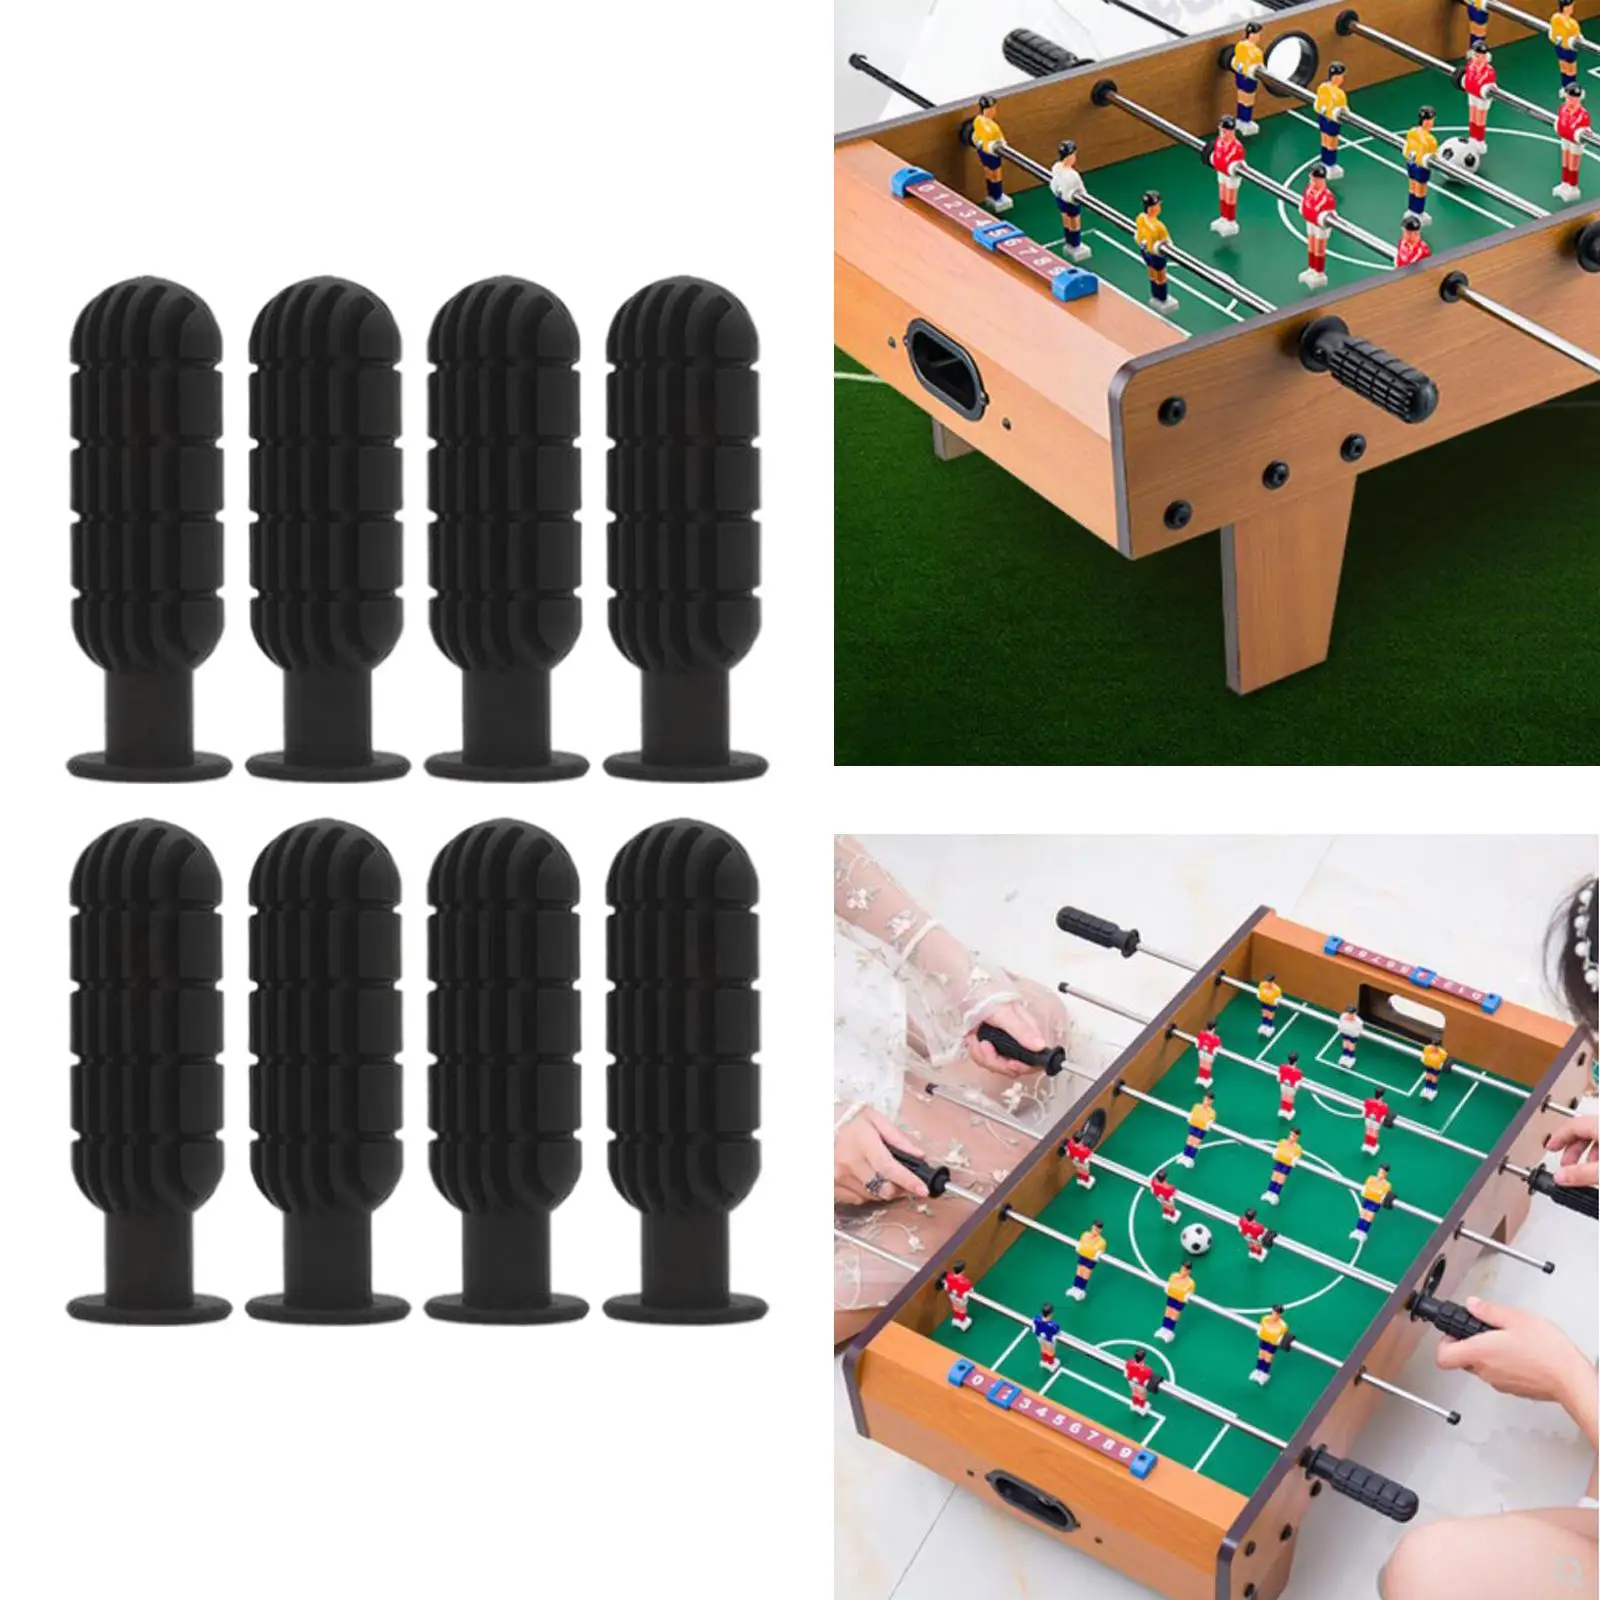 8pcs Table Soccer Part Replacment Kid Children Football  Handle Grip Tabletop Soccer Game Accessories